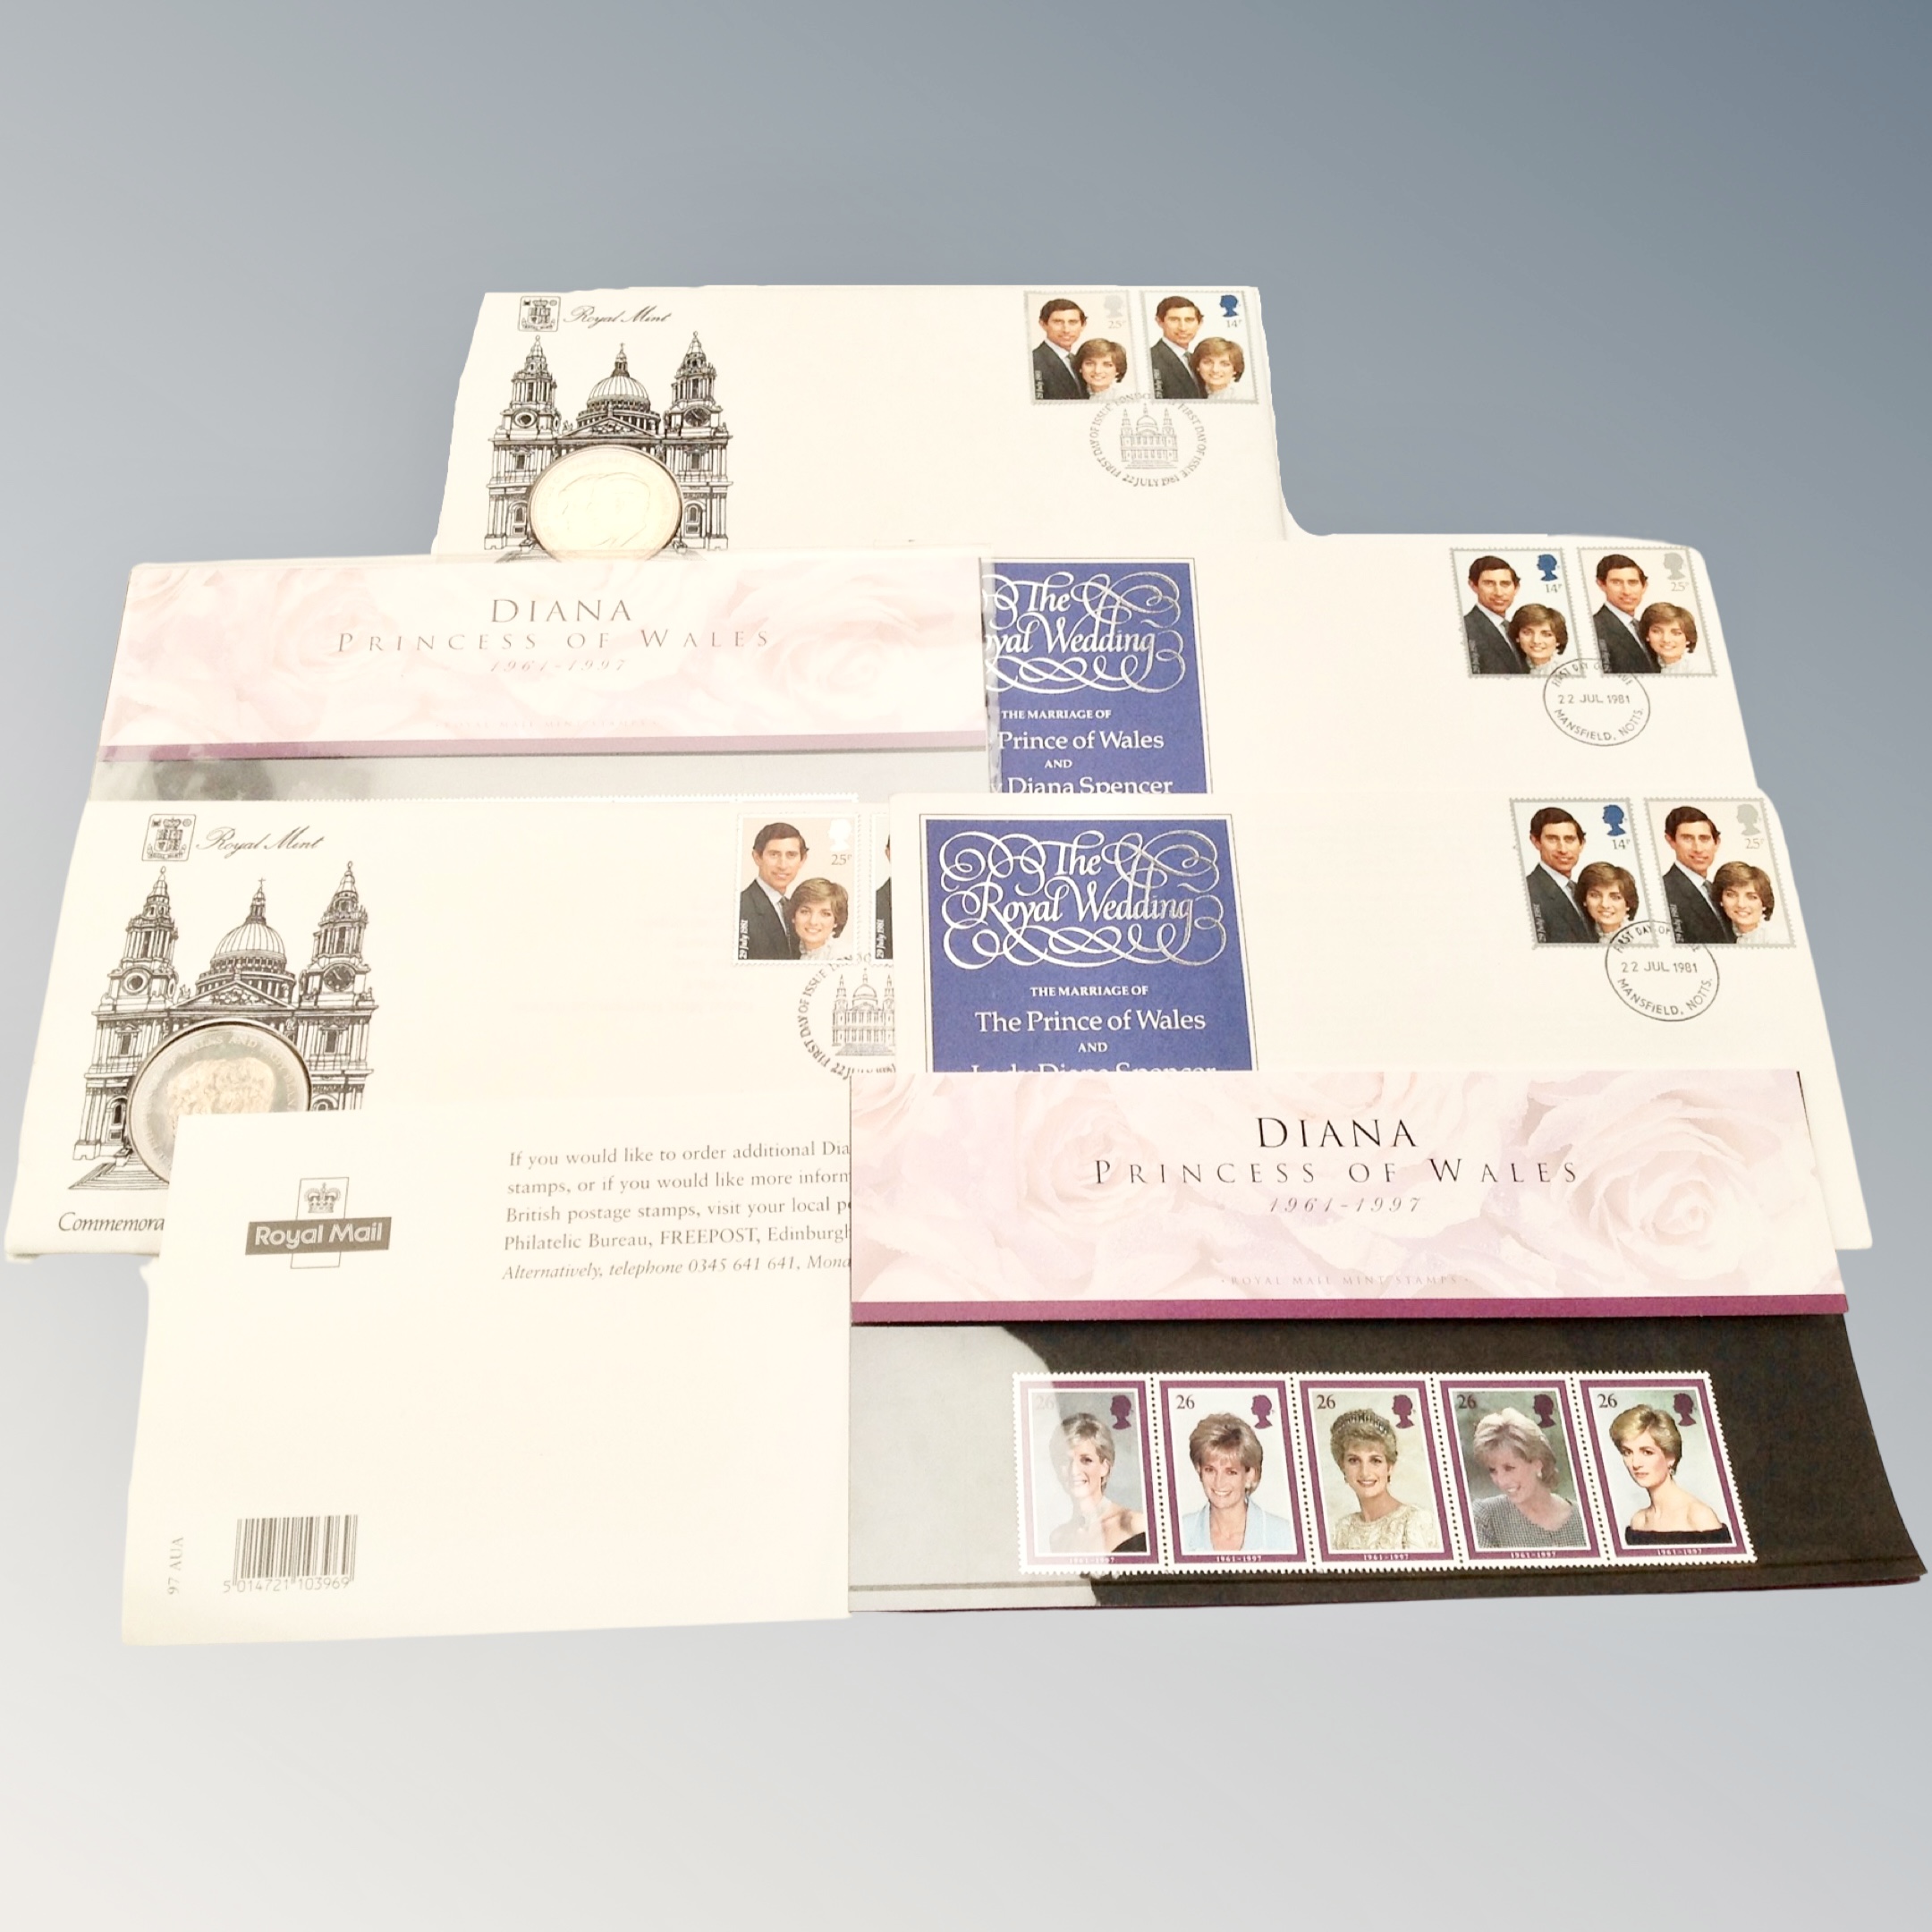 Six envelopes containing stamps and coins depicting Charles and Diana.